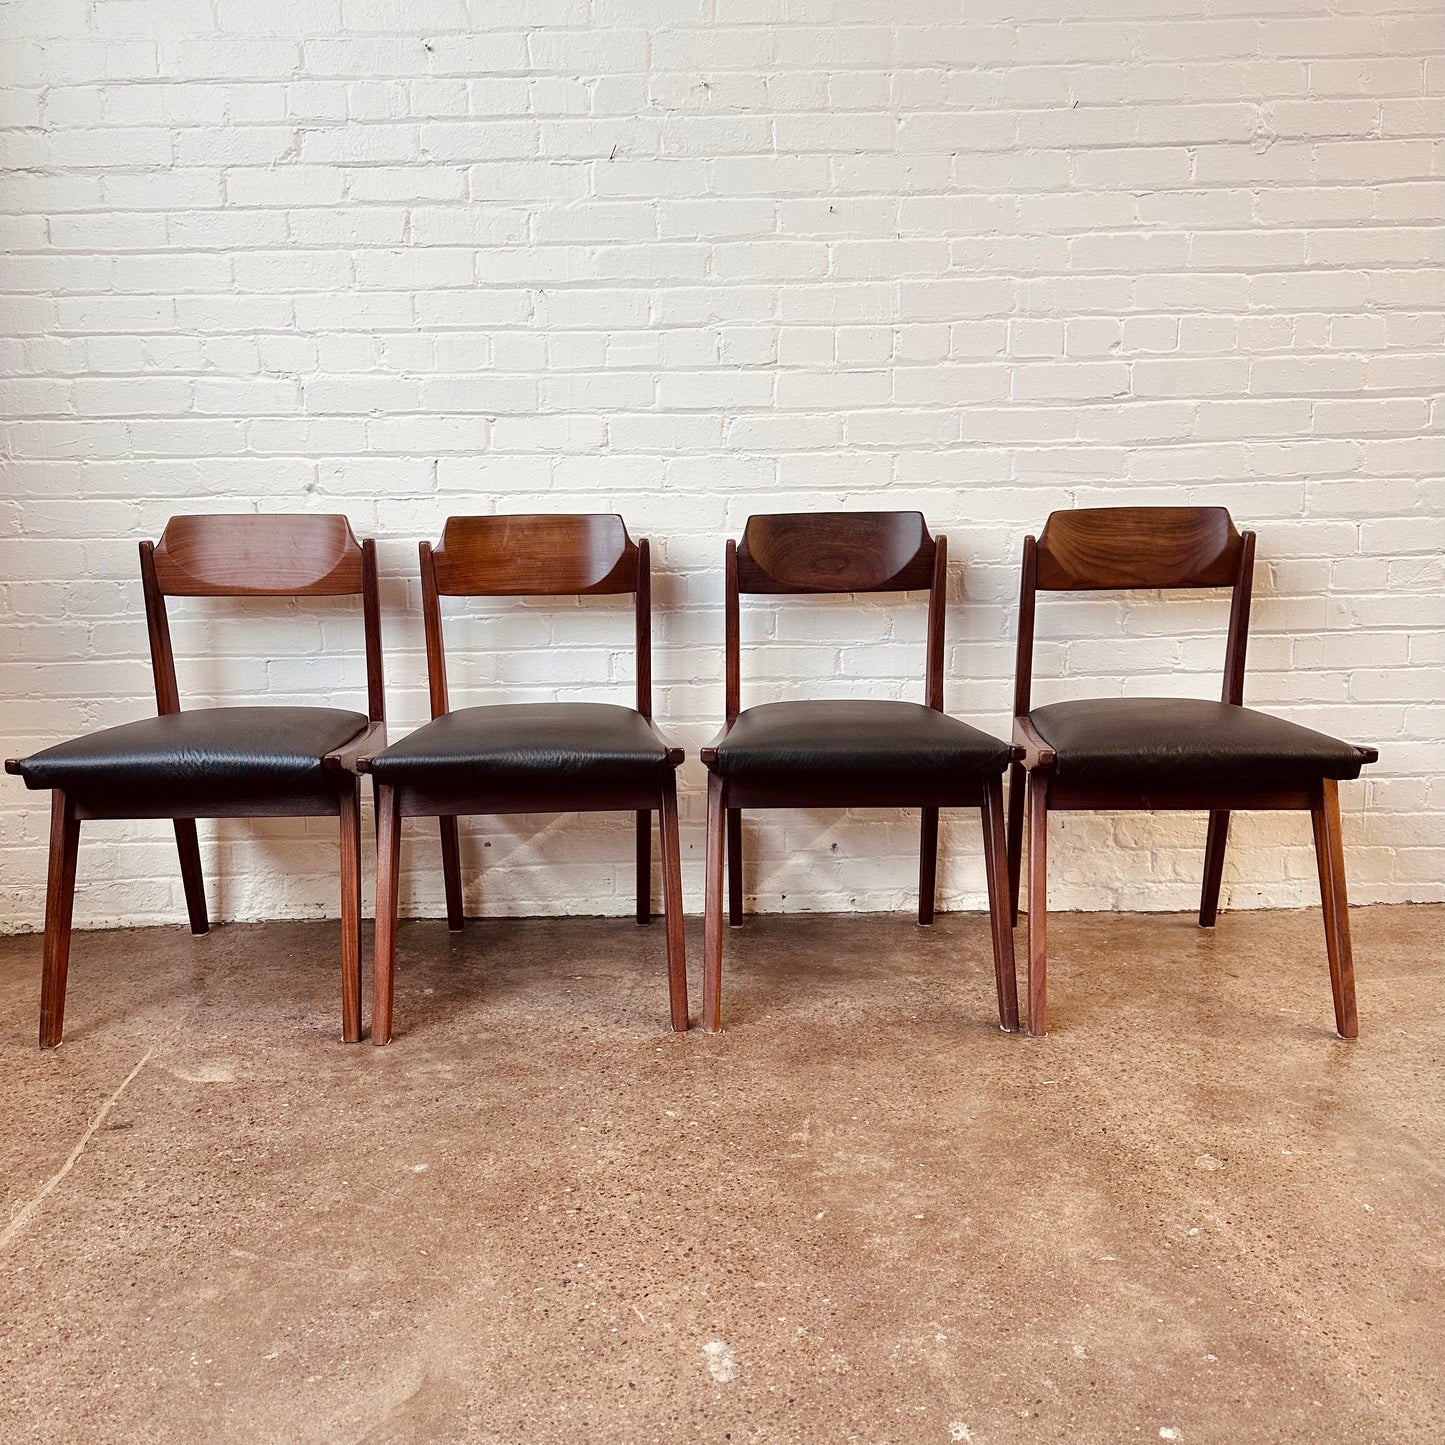 JAN KUYPERS SOLID WALNUT DINING CHAIRS - SET OF 4